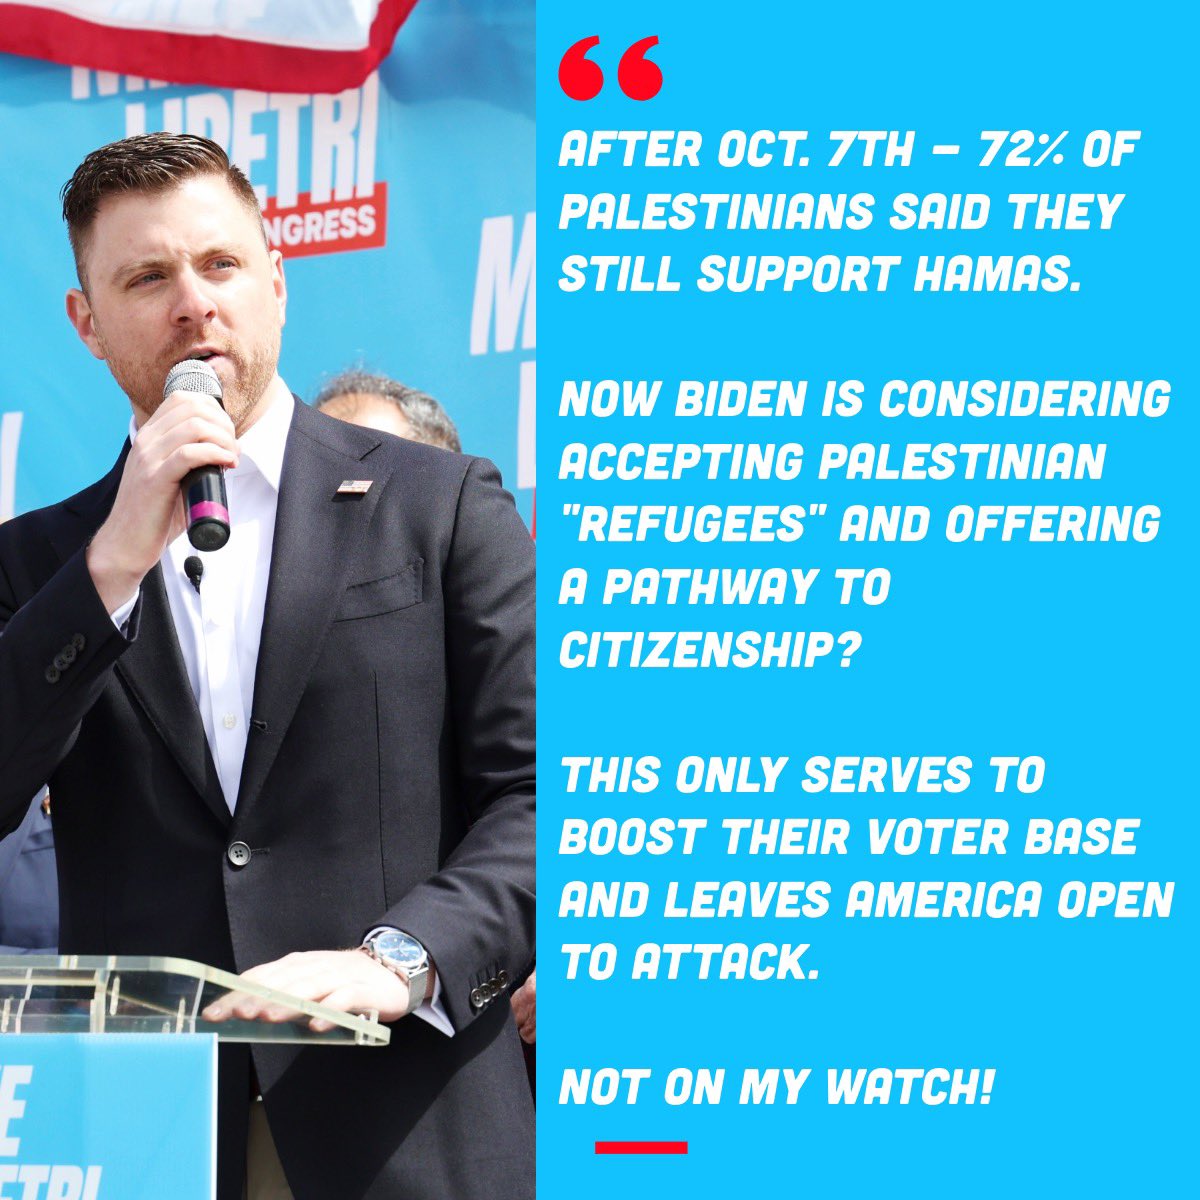 72% of Palestinians said they still support Hamas after the Oct 7th terrorist attack! Now @JoeBiden wants to accept Palestinian refugees and offer a pathway to citizenship? This only serves to boost their voter base and leaves America open to attack. Not on my watch! #NY03